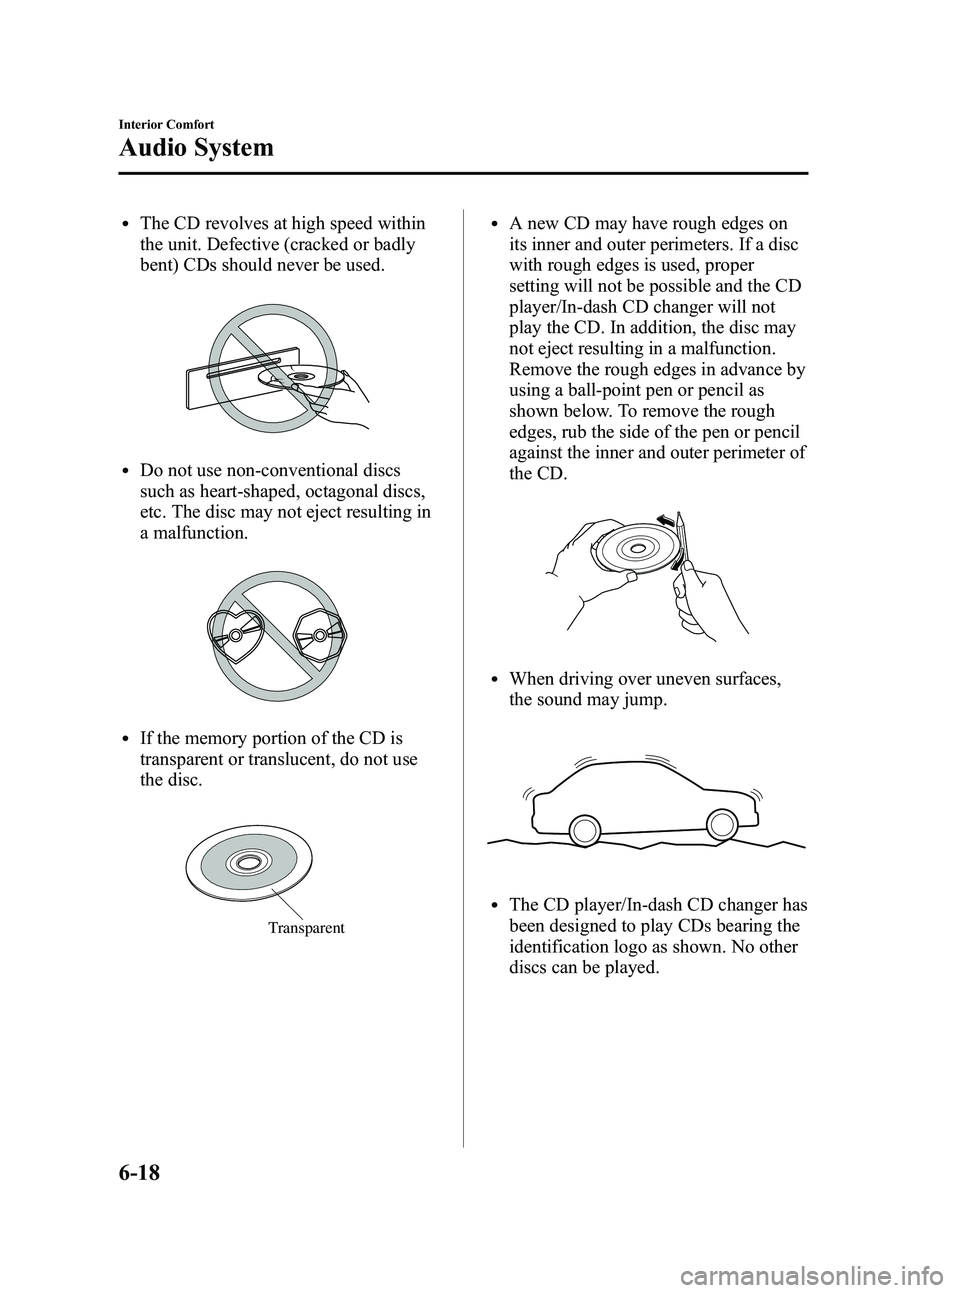 MAZDA MODEL MX-5 MIATA 2010  Owners Manual Black plate (236,1)
lThe CD revolves at high speed within
the unit. Defective (cracked or badly
bent) CDs should never be used.
lDo not use non-conventional discs
such as heart-shaped, octagonal discs